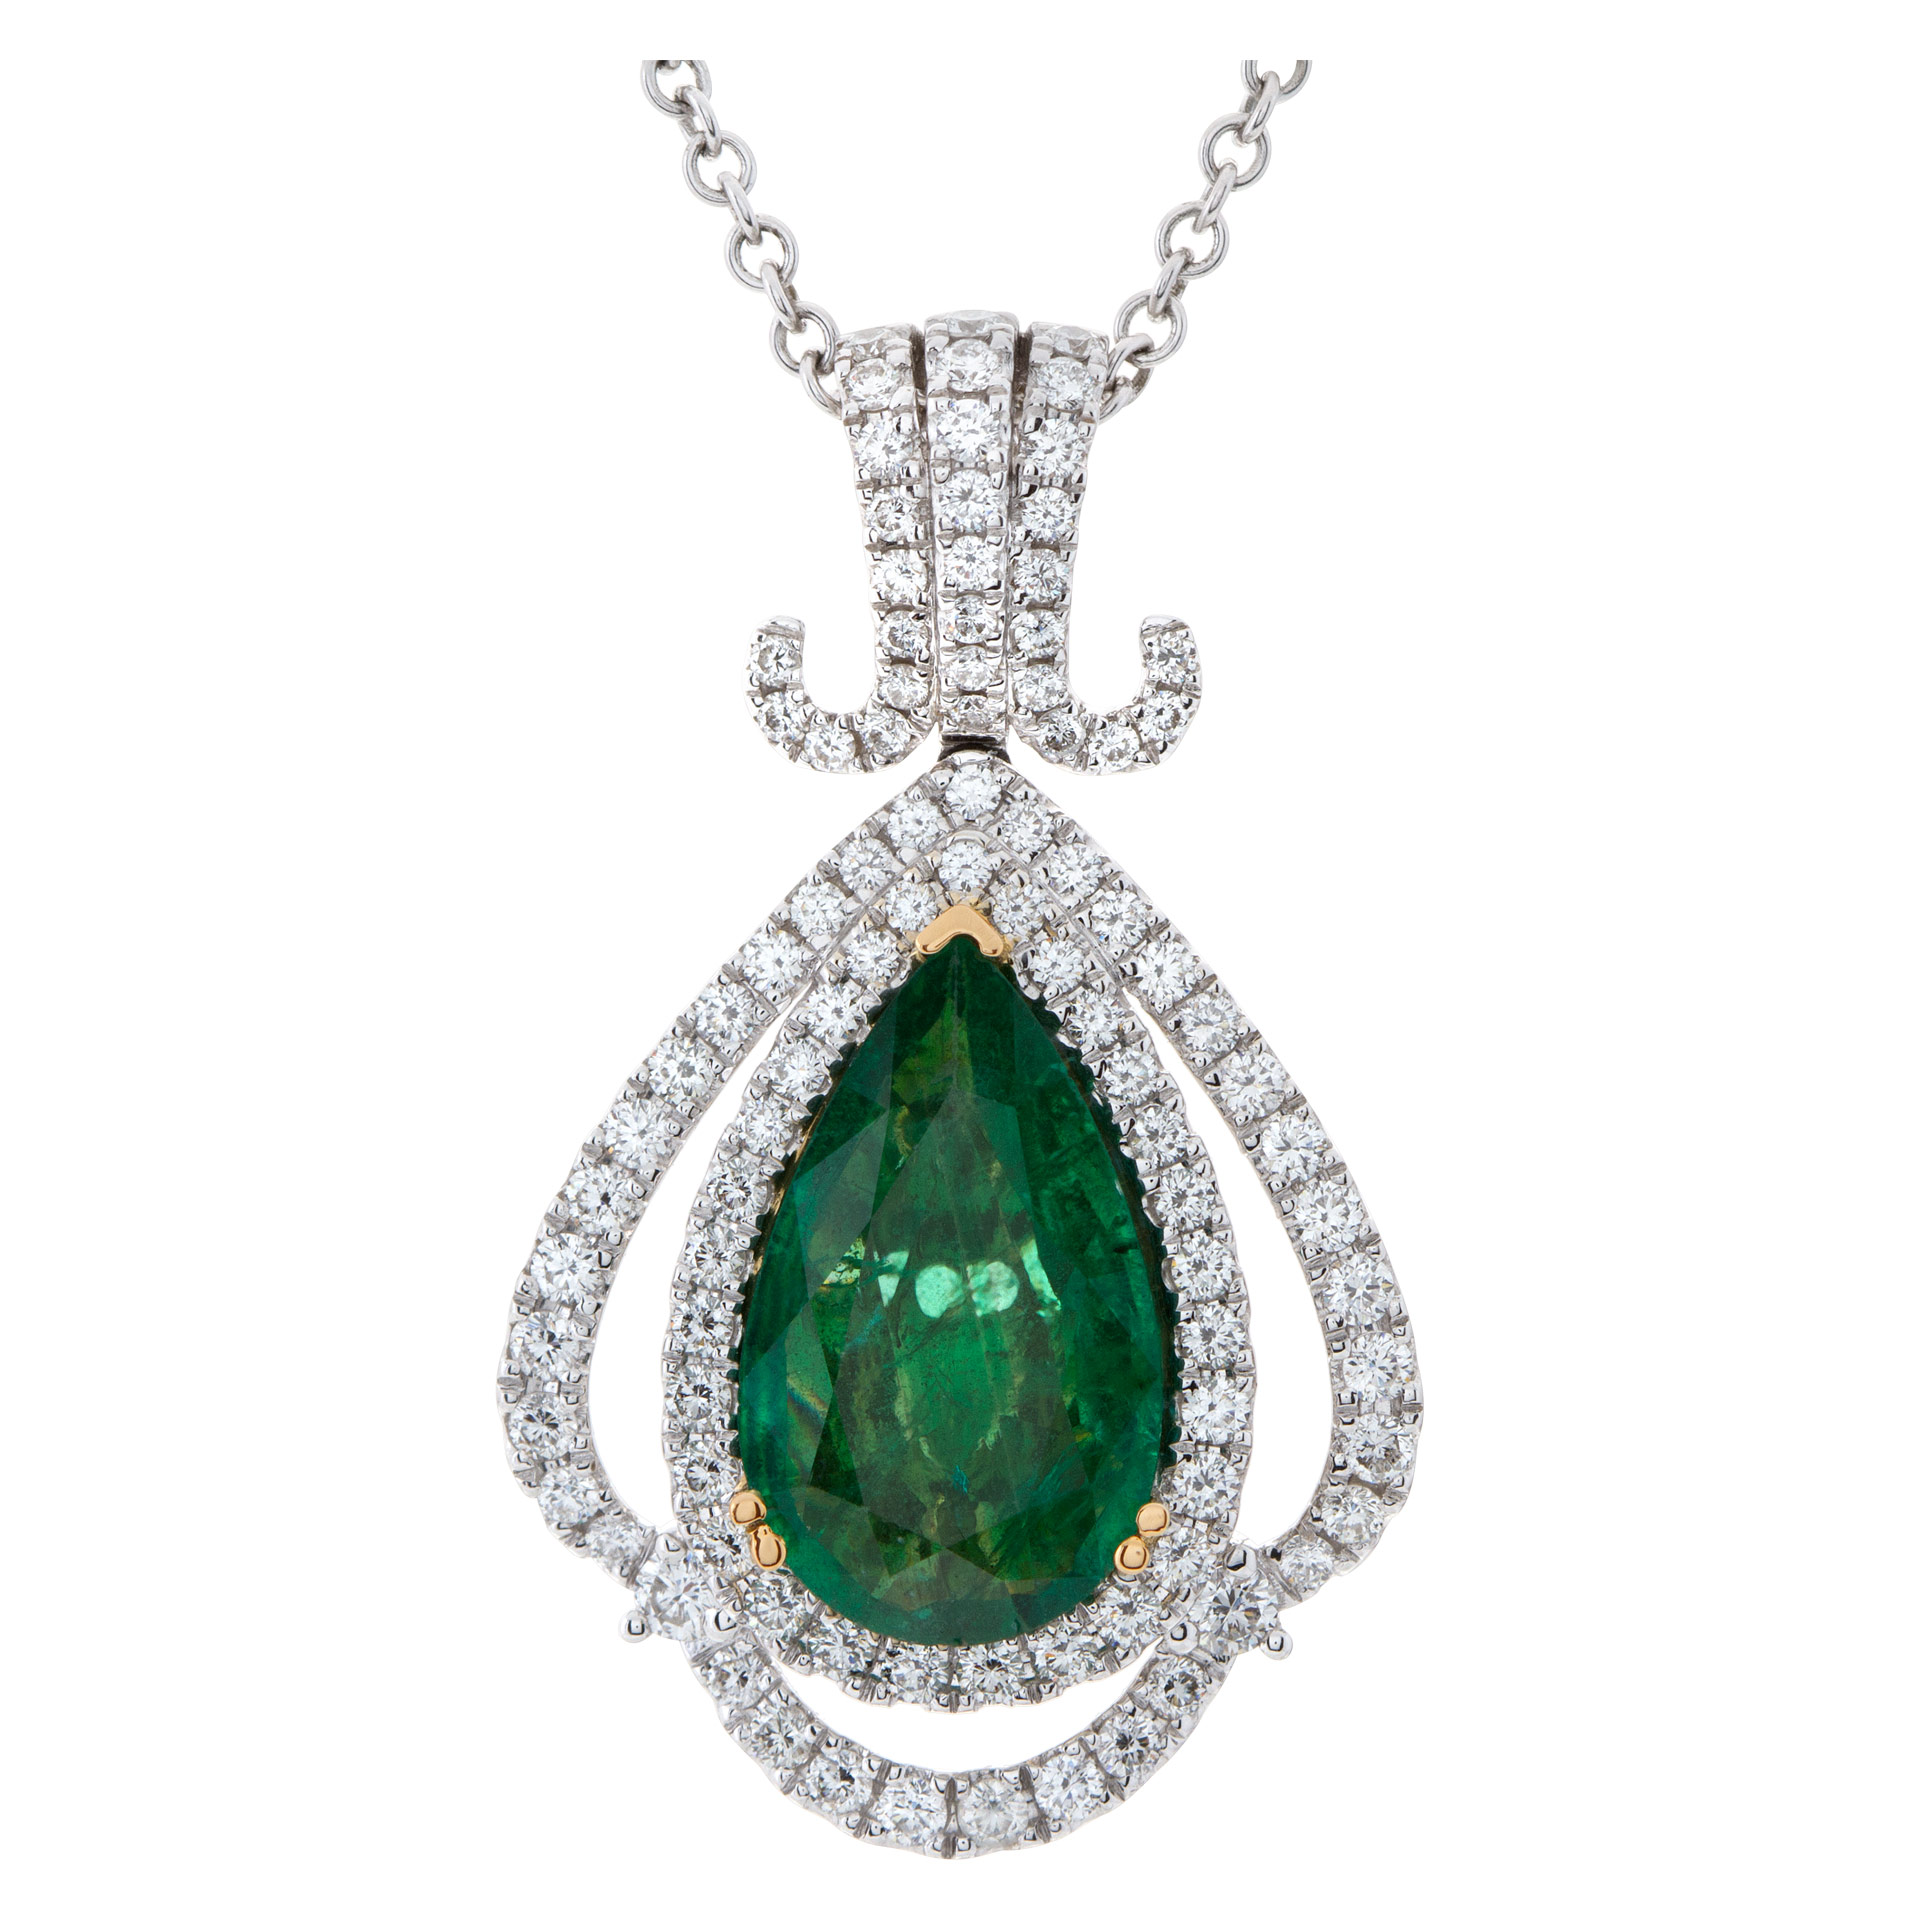 Diamond and emerald pendant necklace in 18k white gold